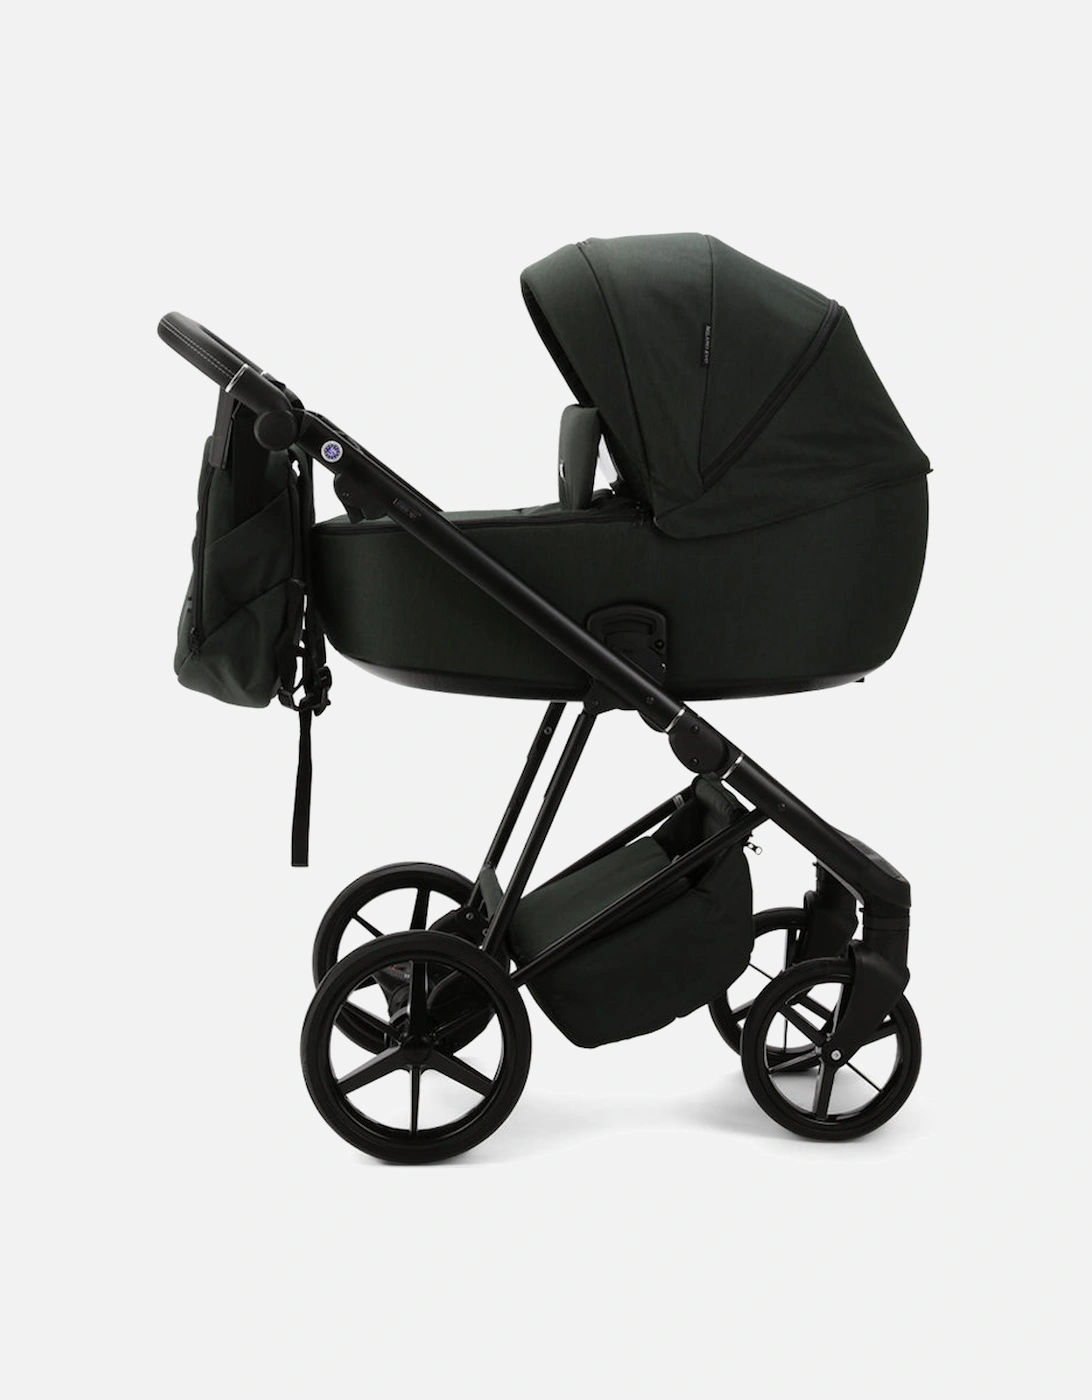 Milano Evo Green - Chassis, Carry Cot, Seat Unit & Accessories, 9 of 8